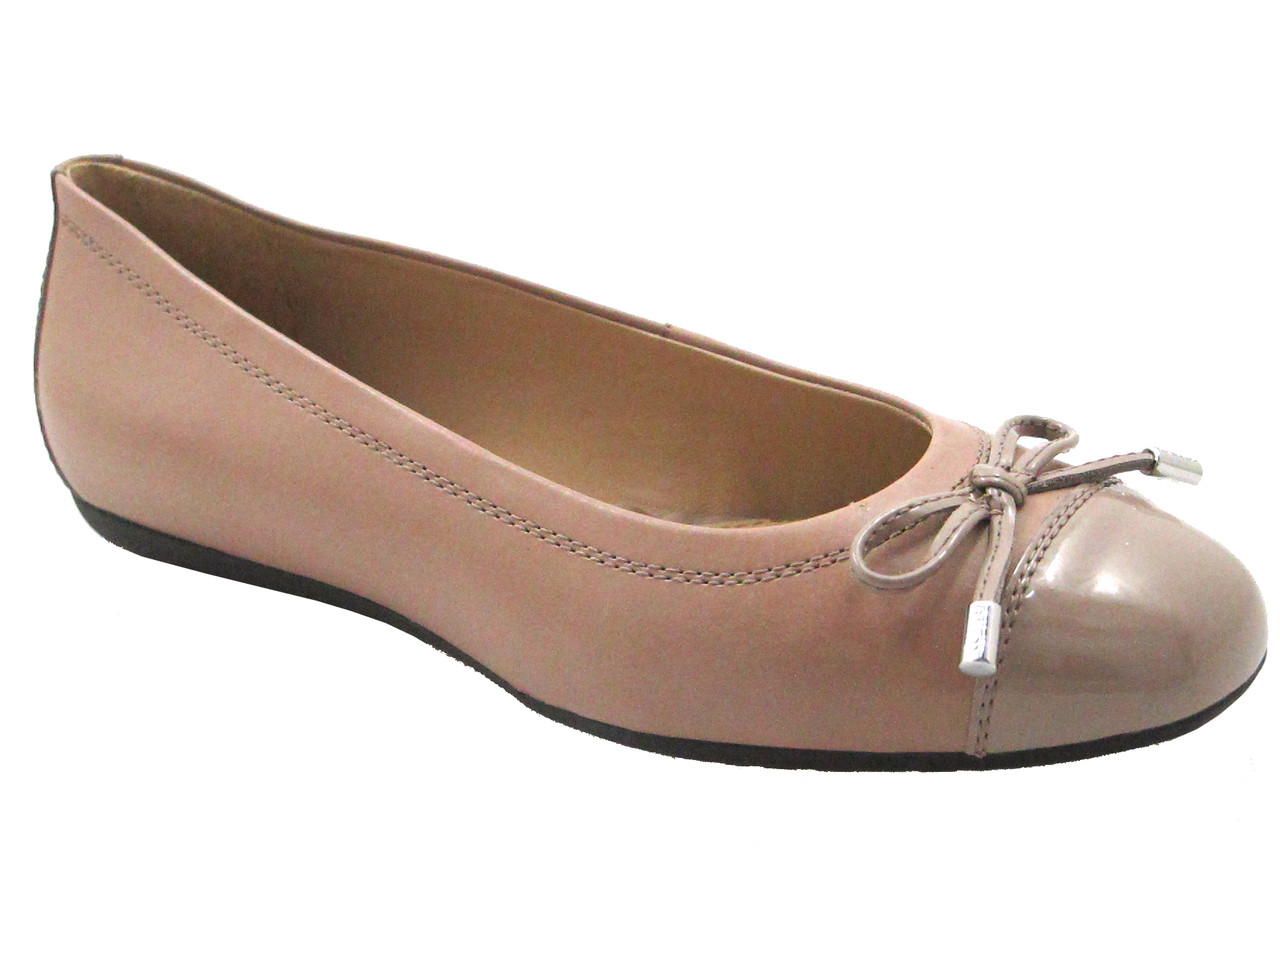 Respira Dlola L - Nappa Patent Leather Flat Ballet shoes in Grey or Black